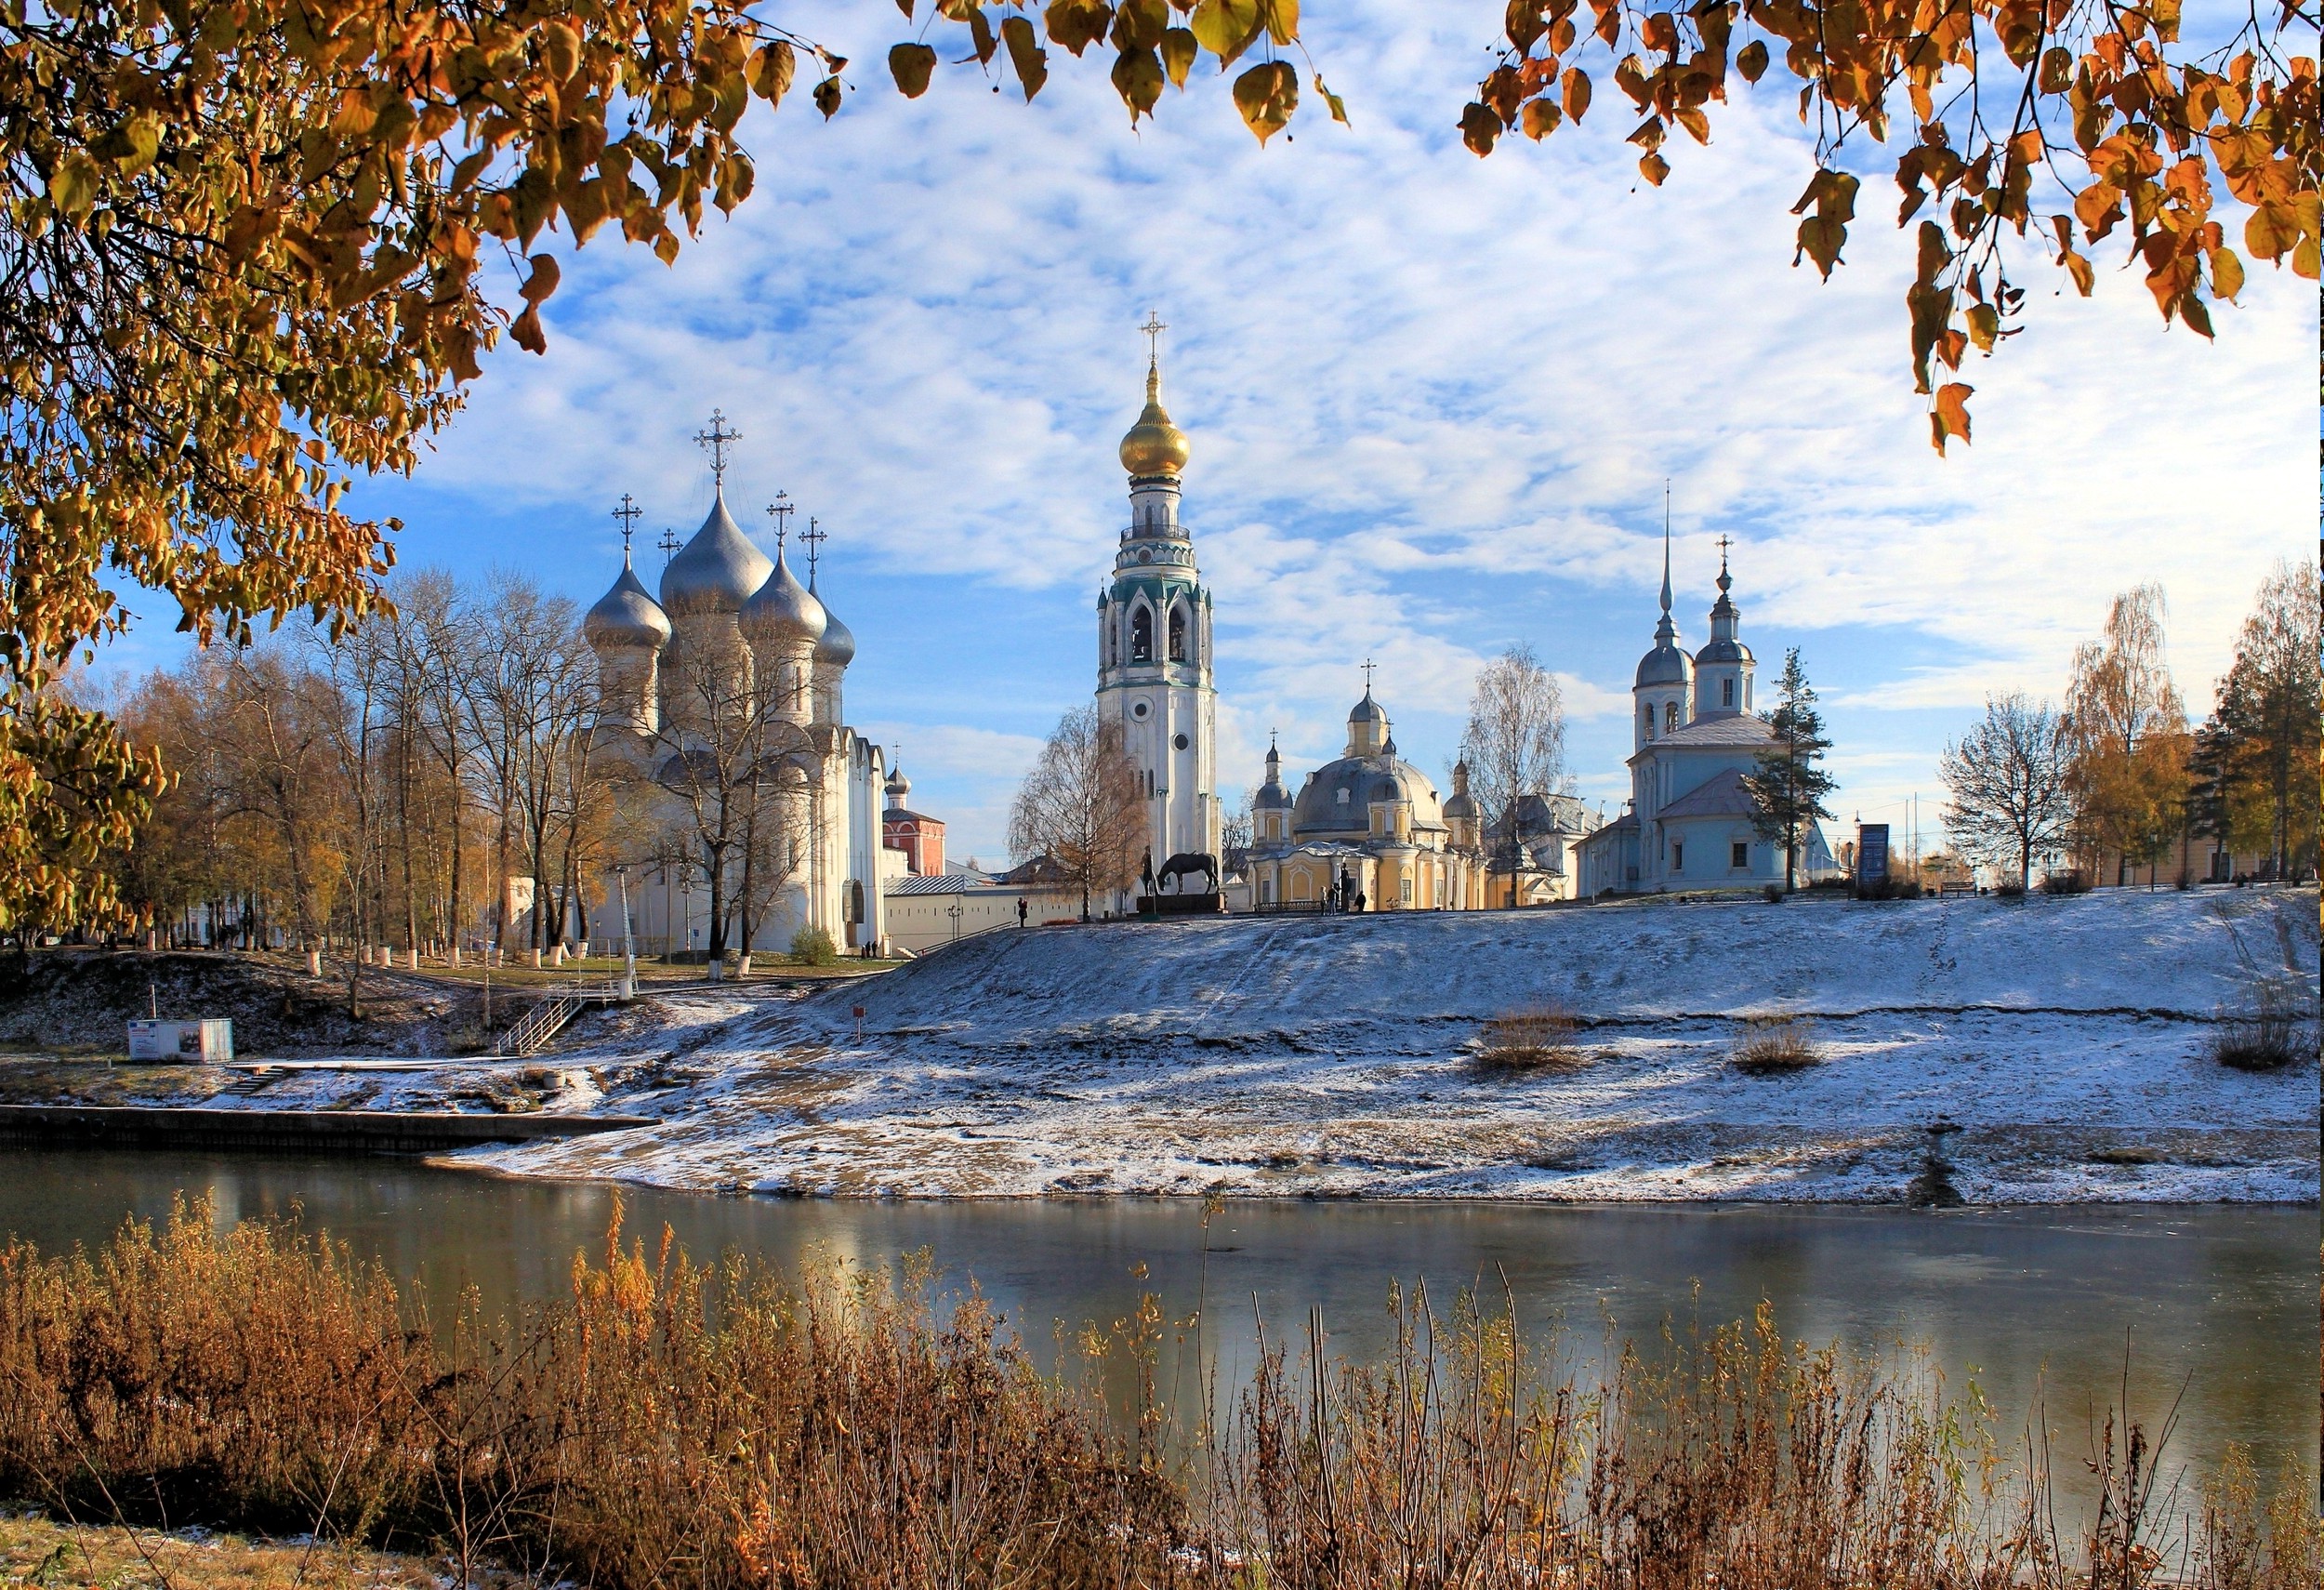 nature, Landscape, Architecture, Clouds, Water, Trees, Russia, Winter, Snow, River, Church, Tower, Leaves, Cross Wallpaper